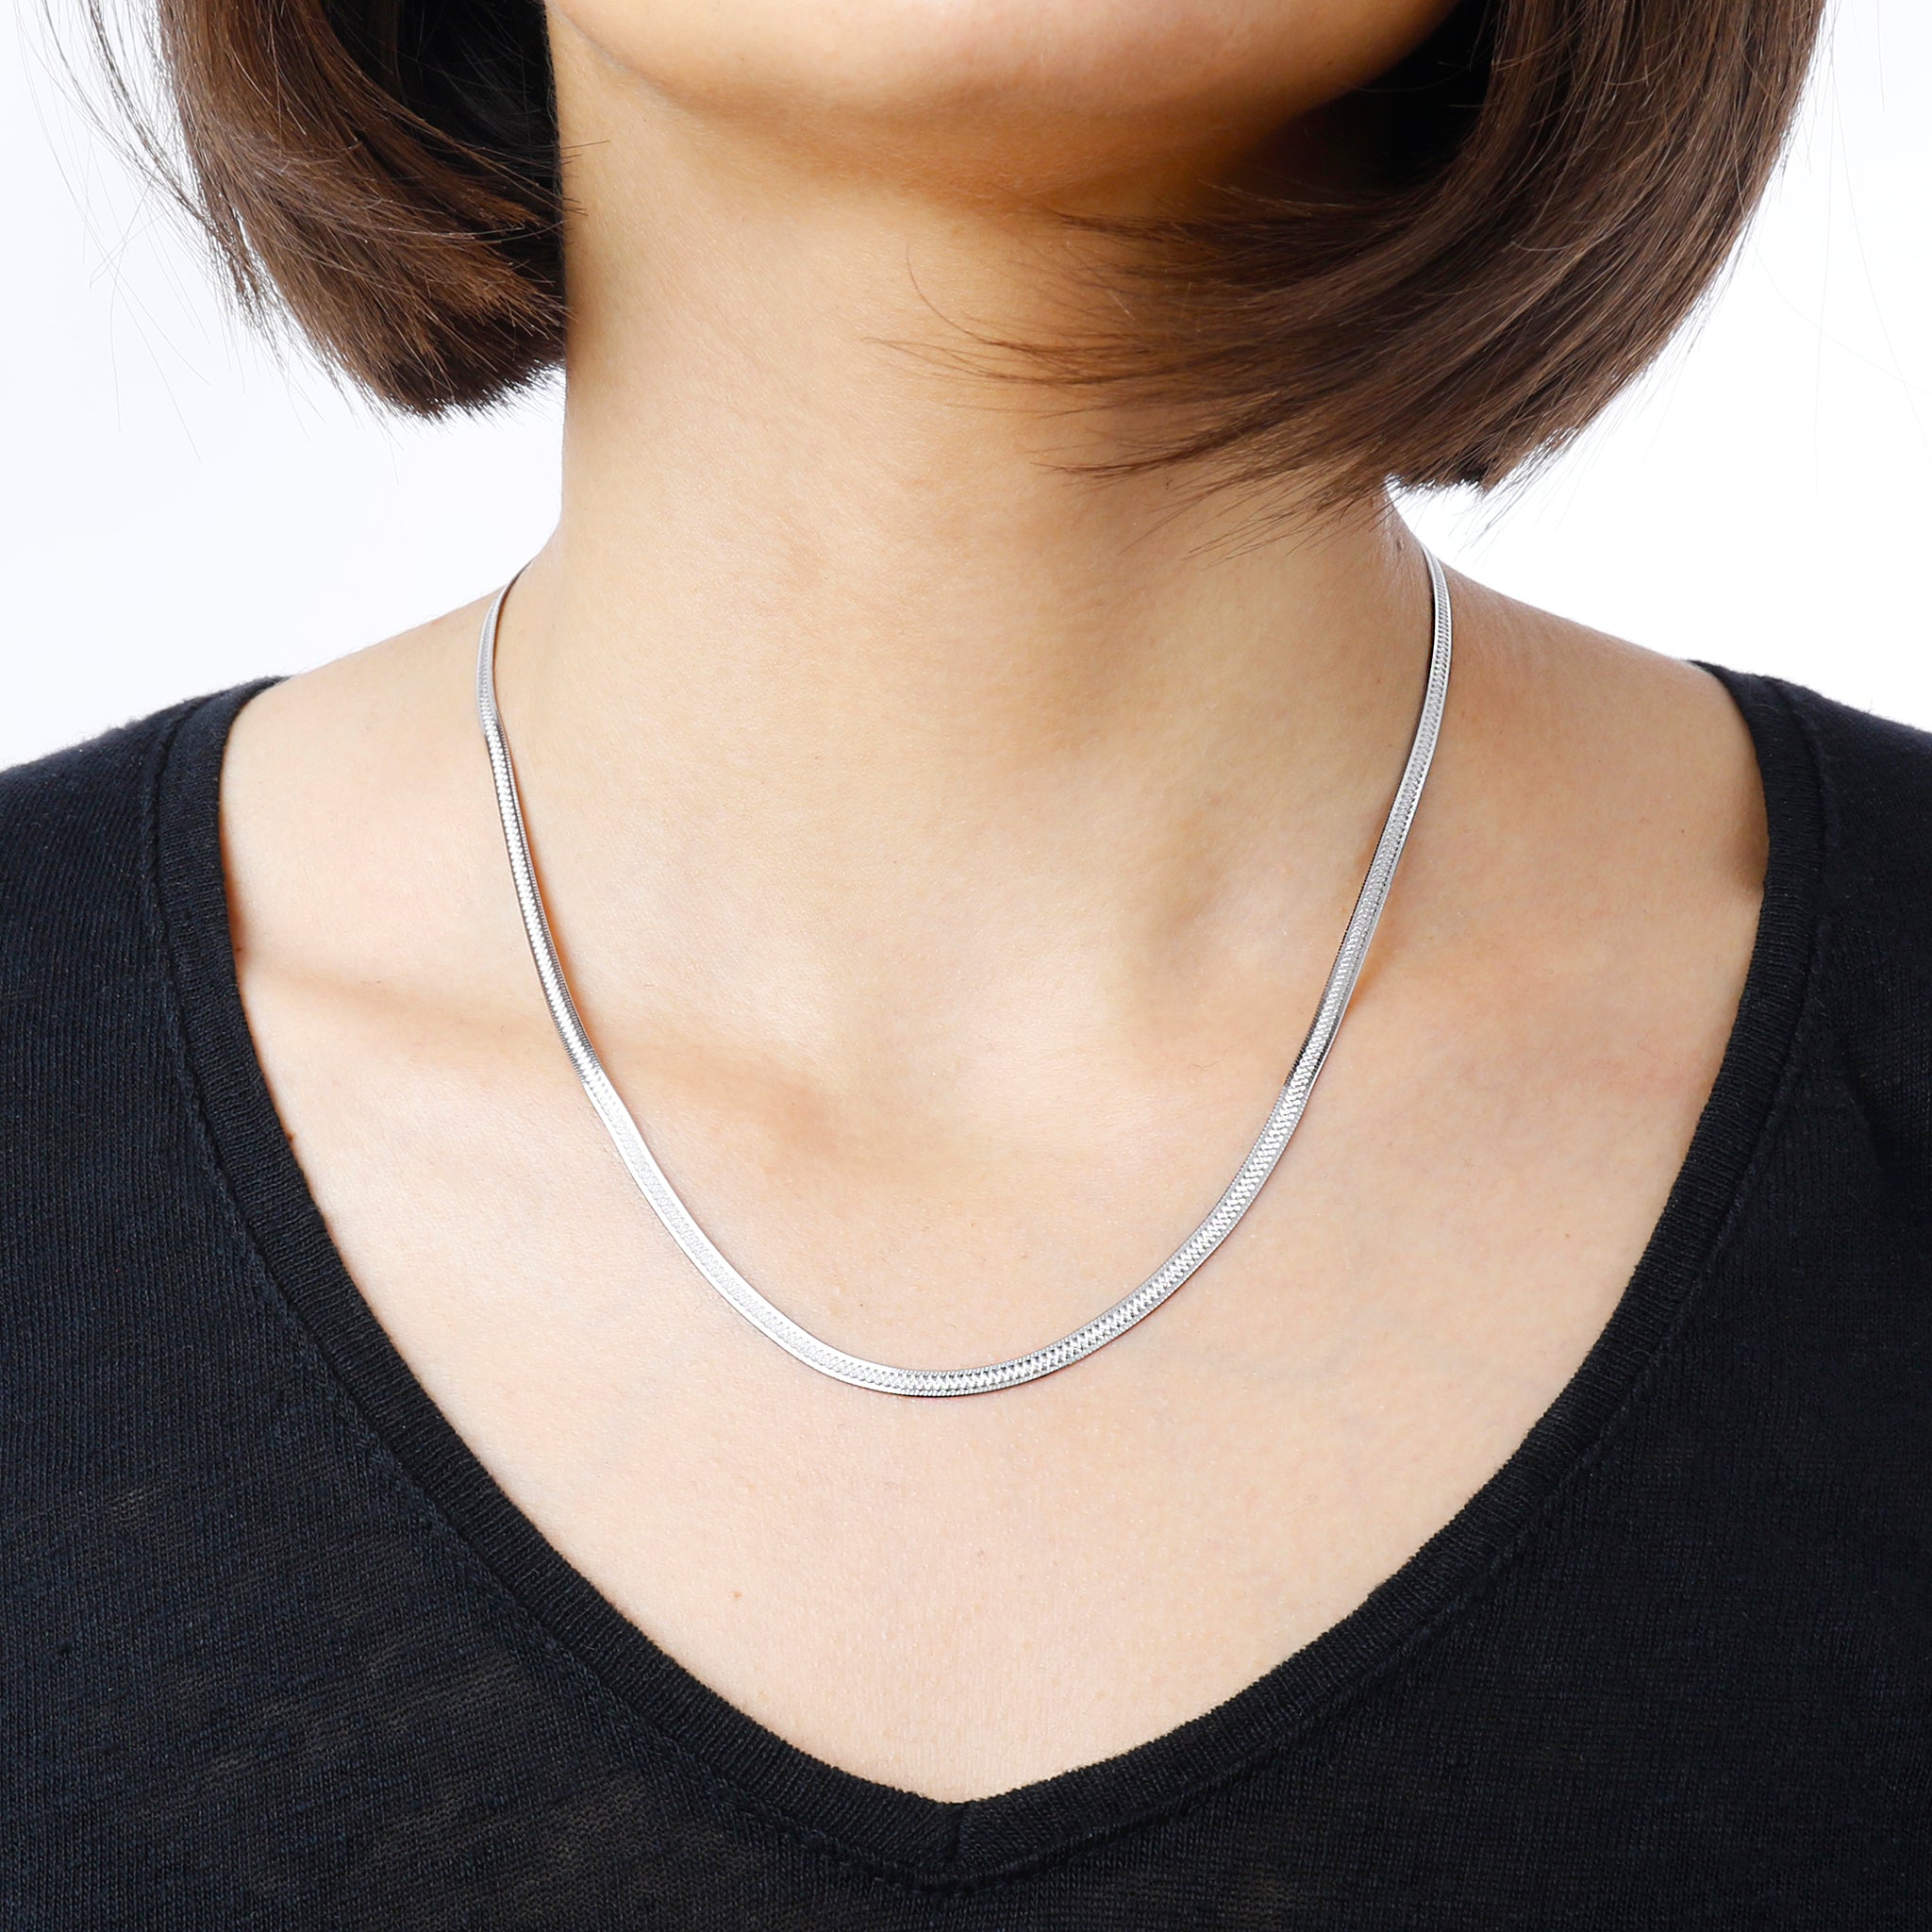 Silver Reflections Pure Silver Over Brass 16 Inch Herringbone Chain Necklace  - JCPenney